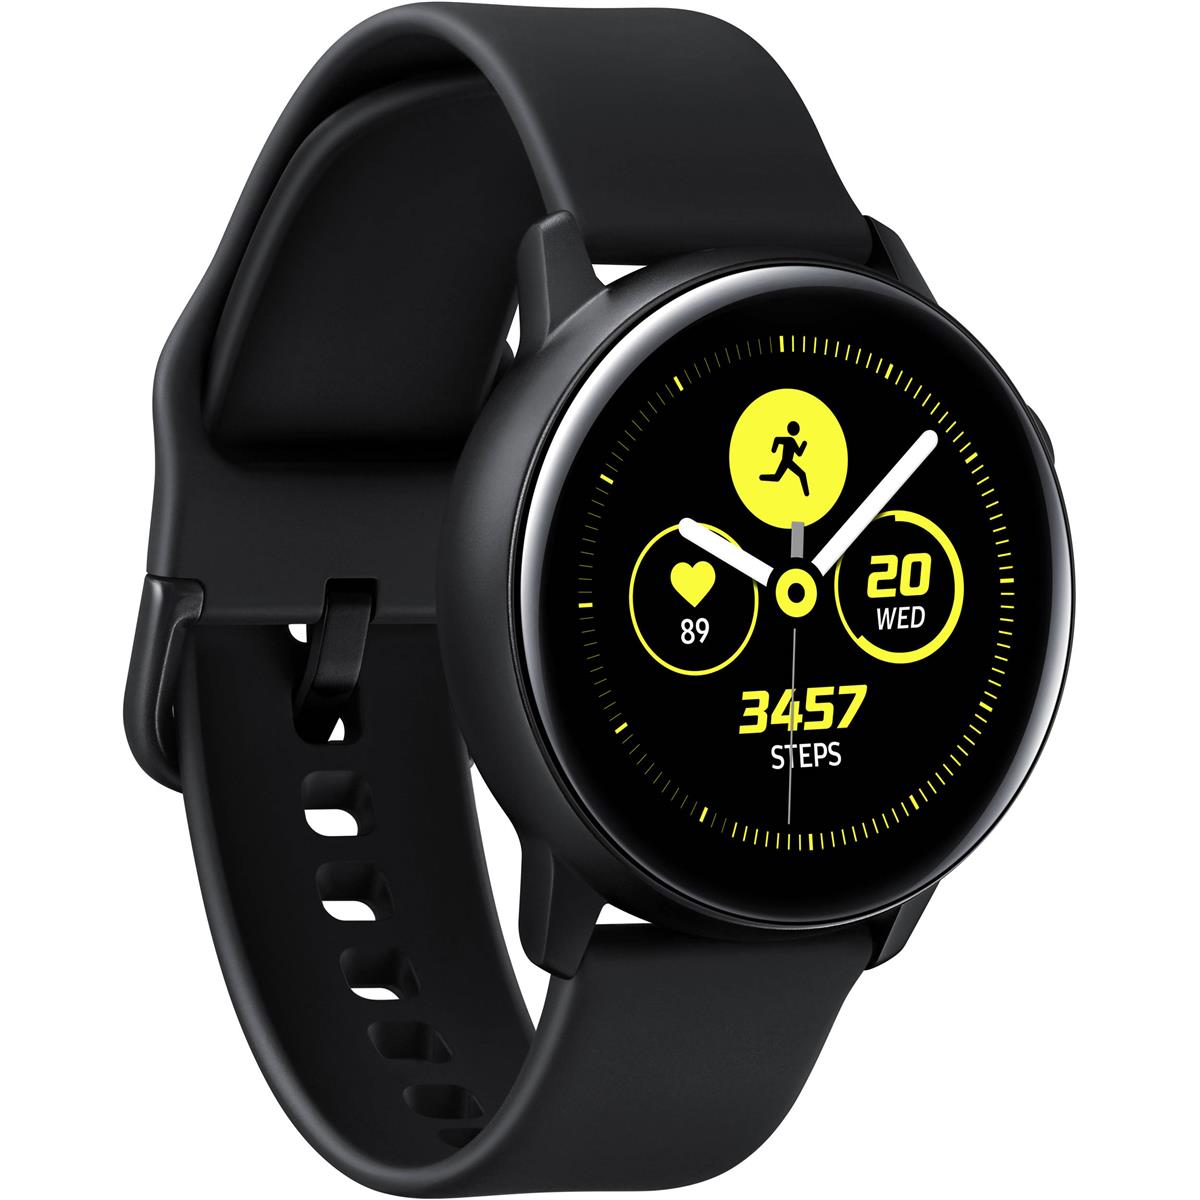 Image of Samsung Galaxy Watch Active with Bluetooth